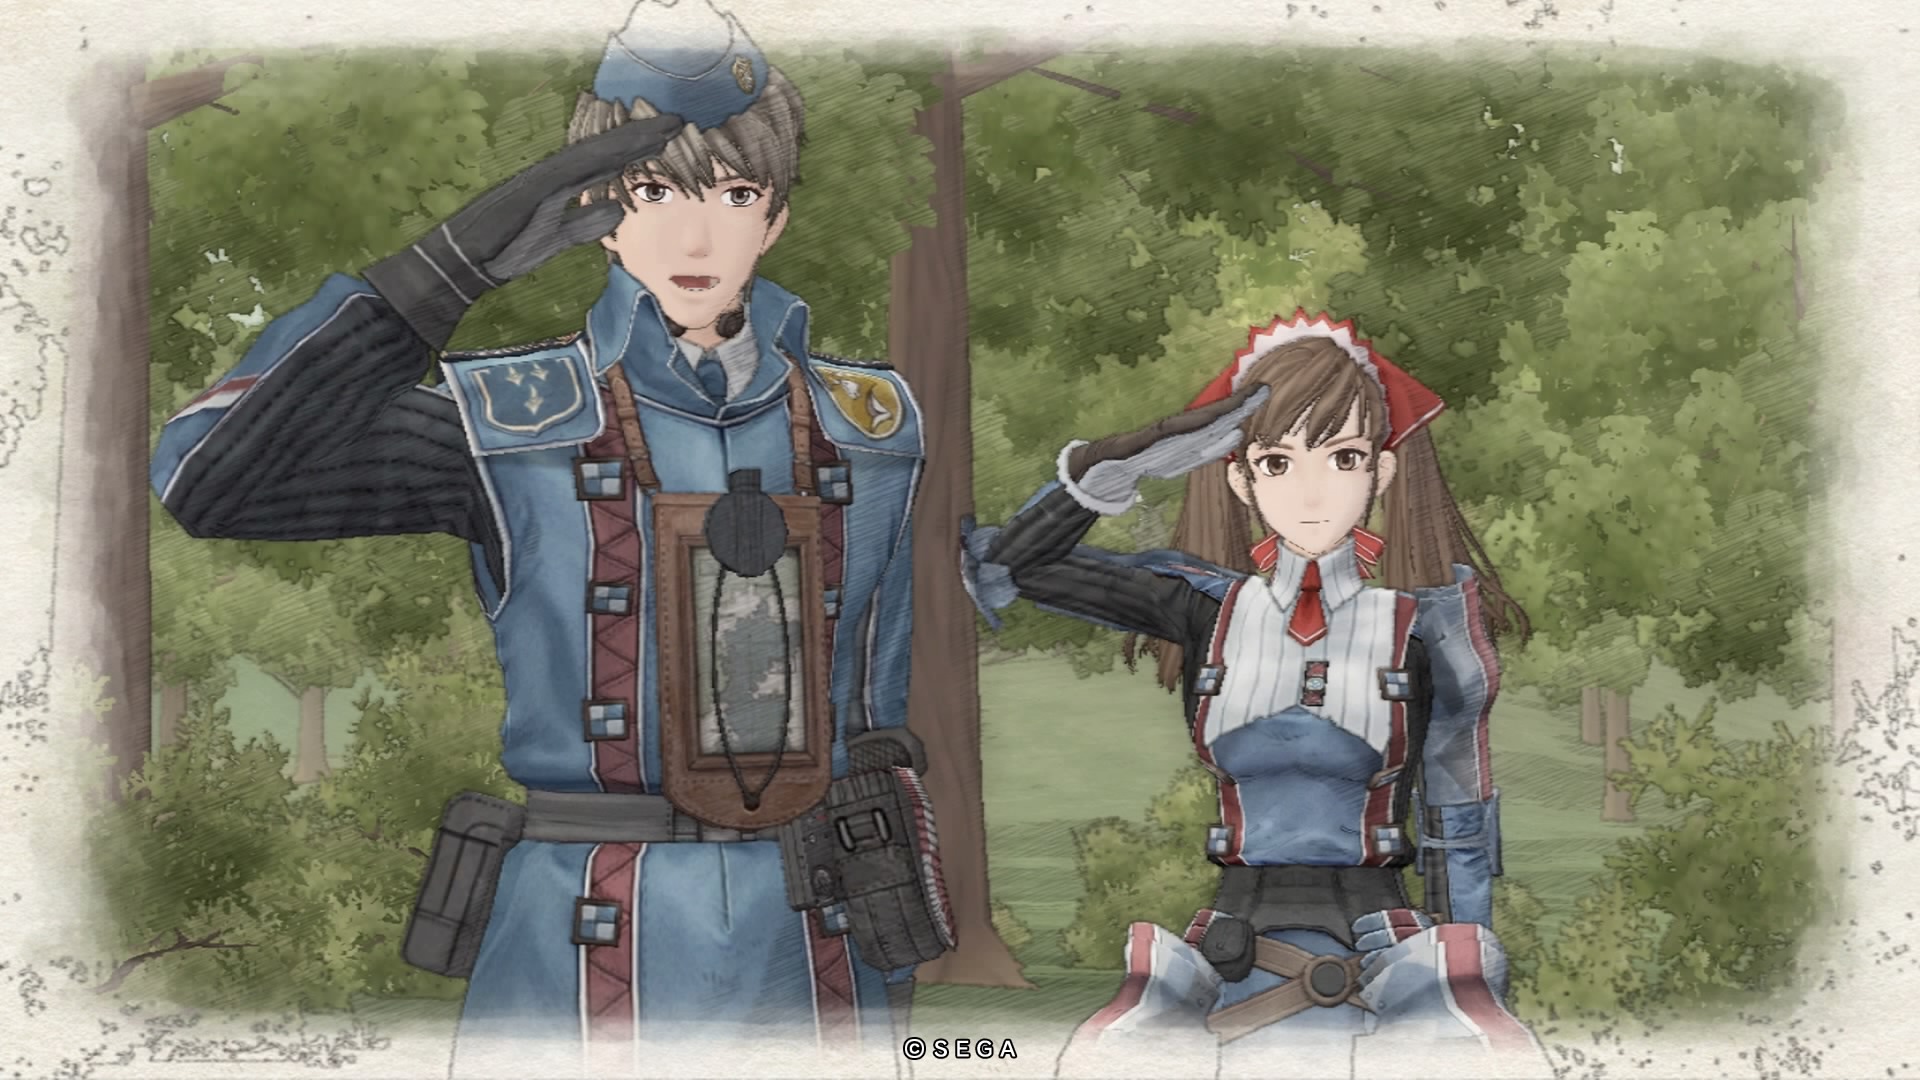 Valkyria Chronicles Remastered Review: Let’s Go Squad 7!